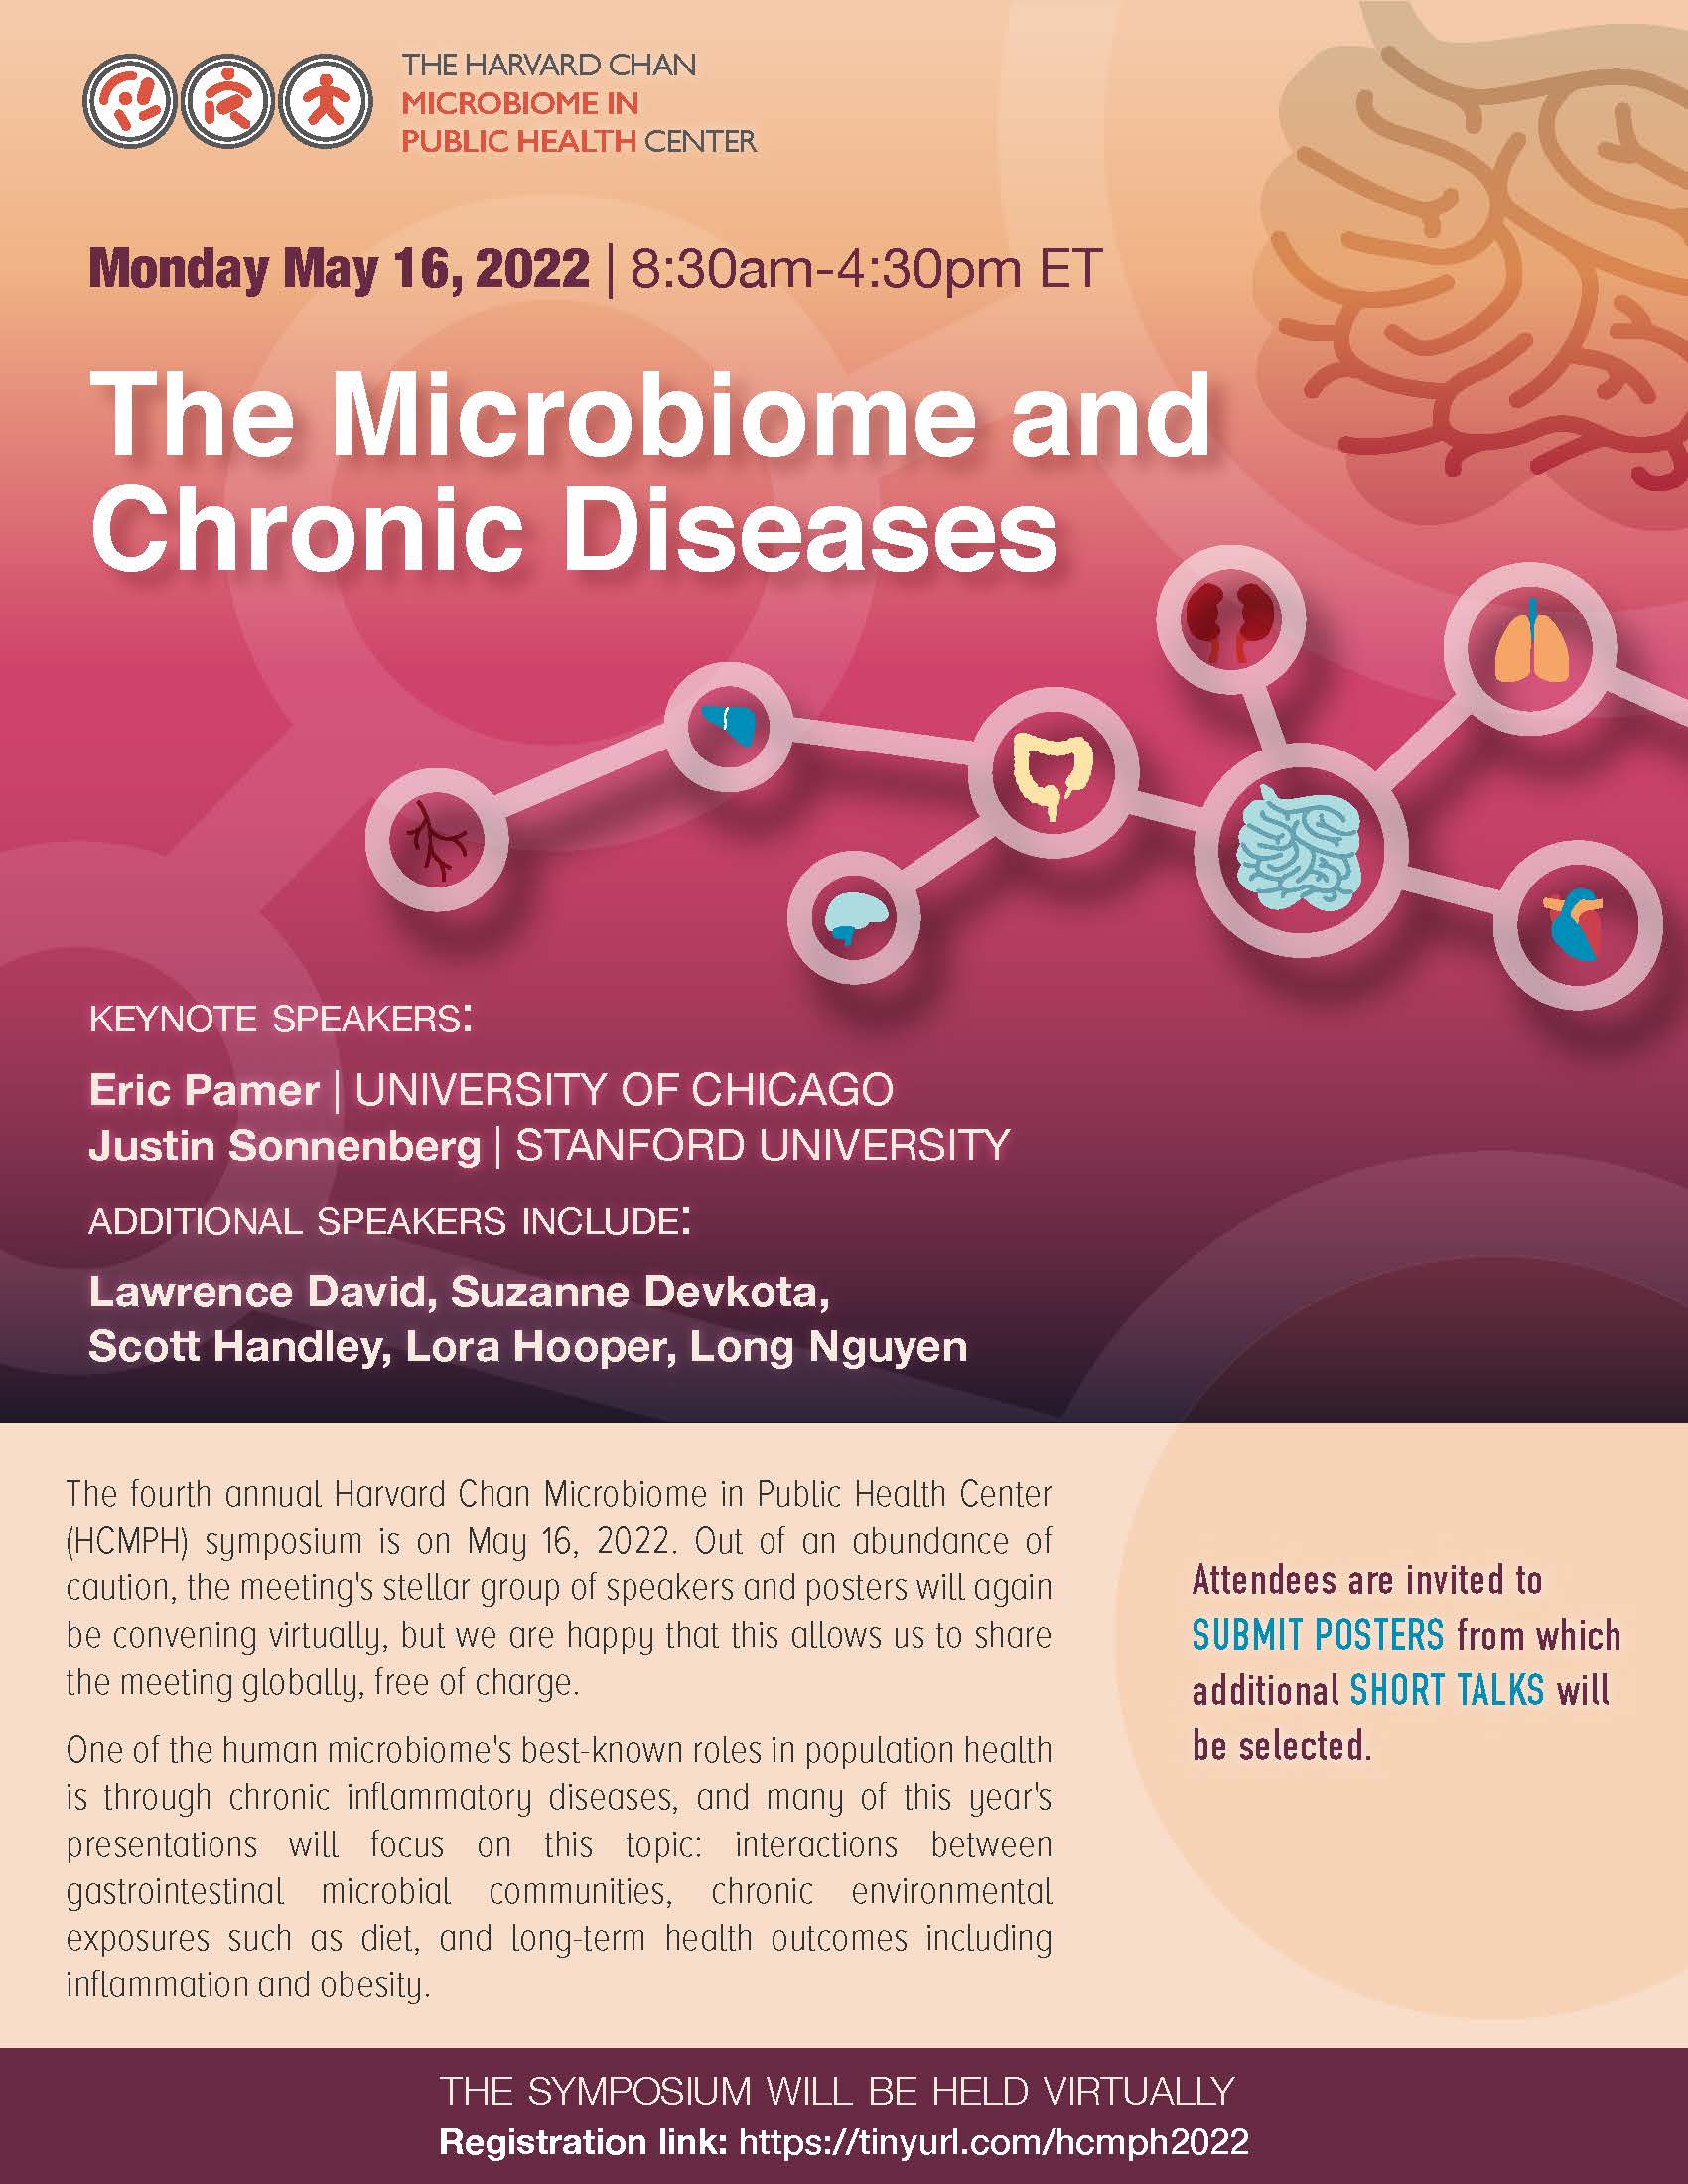 HCMPH Symposium: The Microbiome and Chronic Diseases